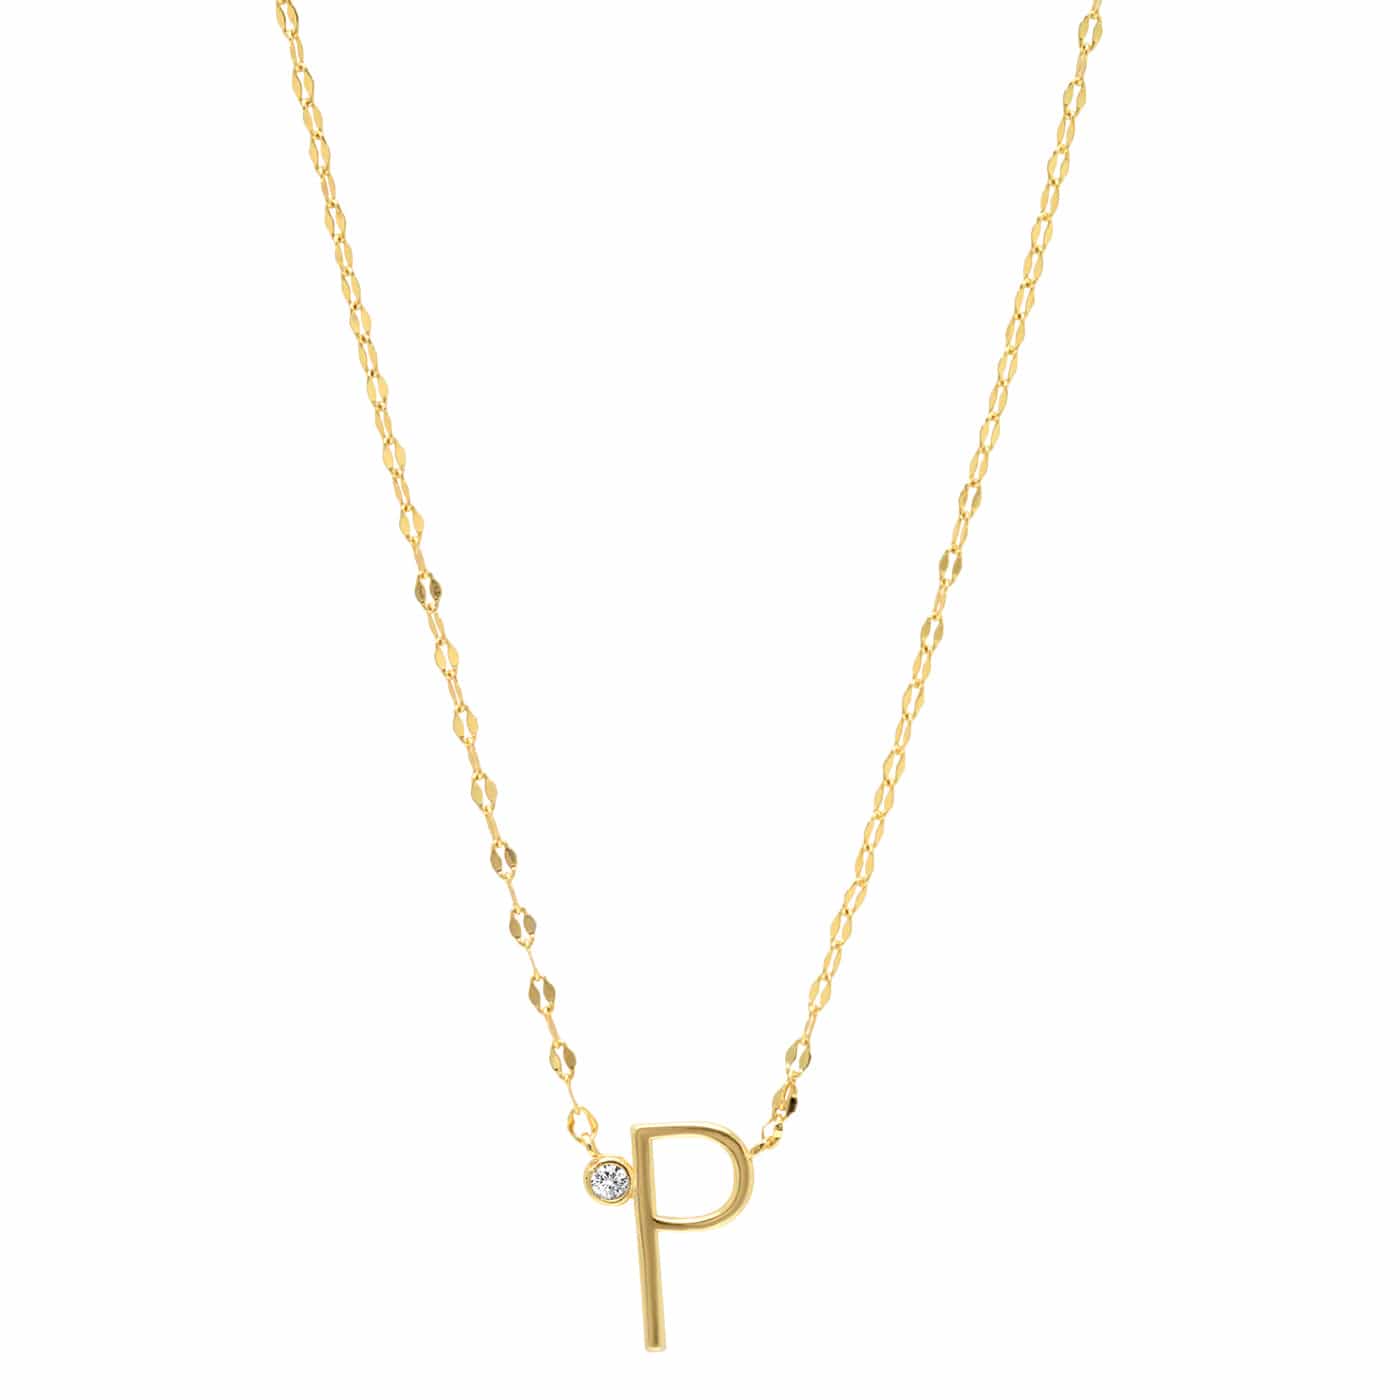 TAI JEWELRY Necklace P Medium Sized Initial Necklace With Cz Accent